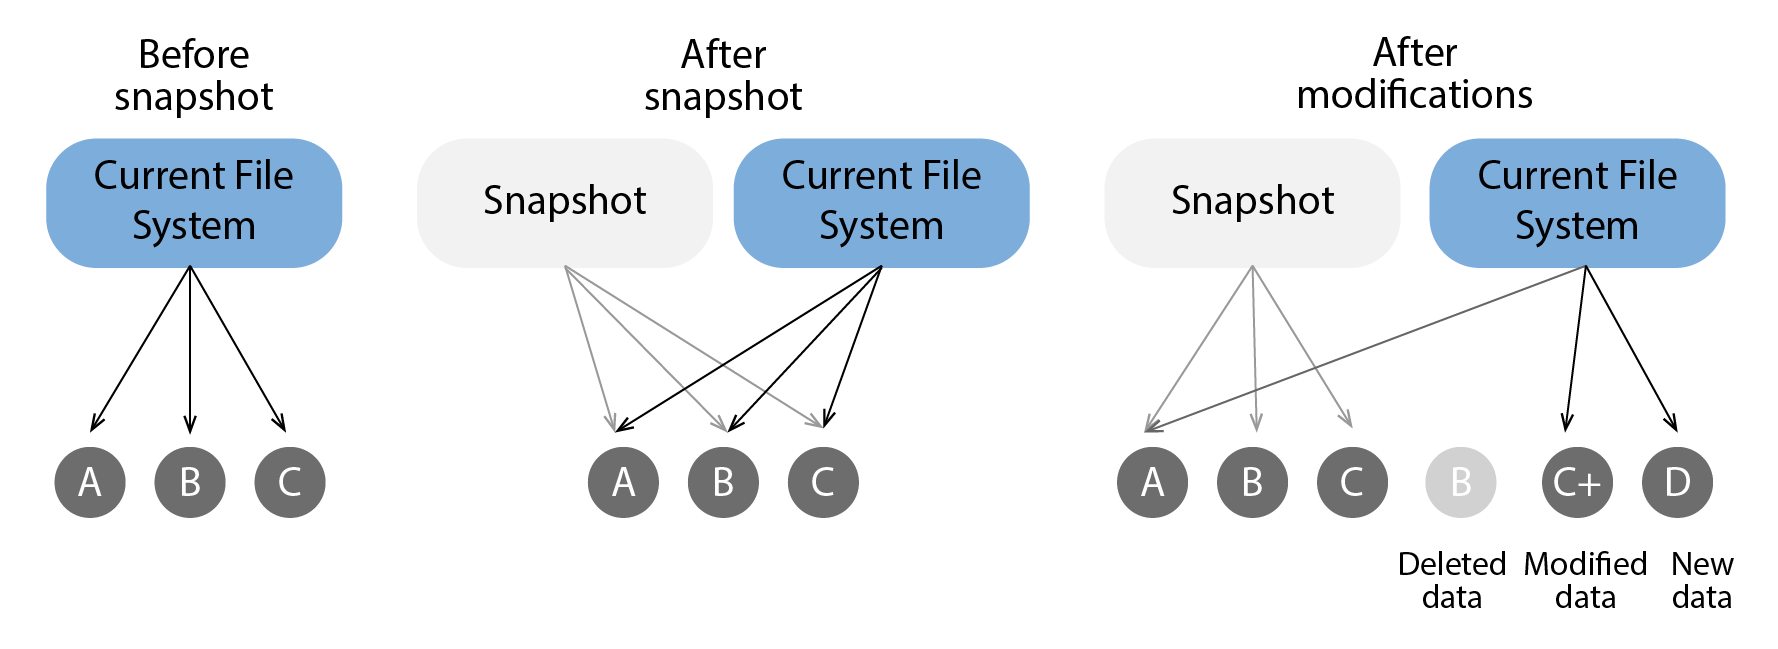 Generation of snapshots by P5 Synchronize to retain file system information